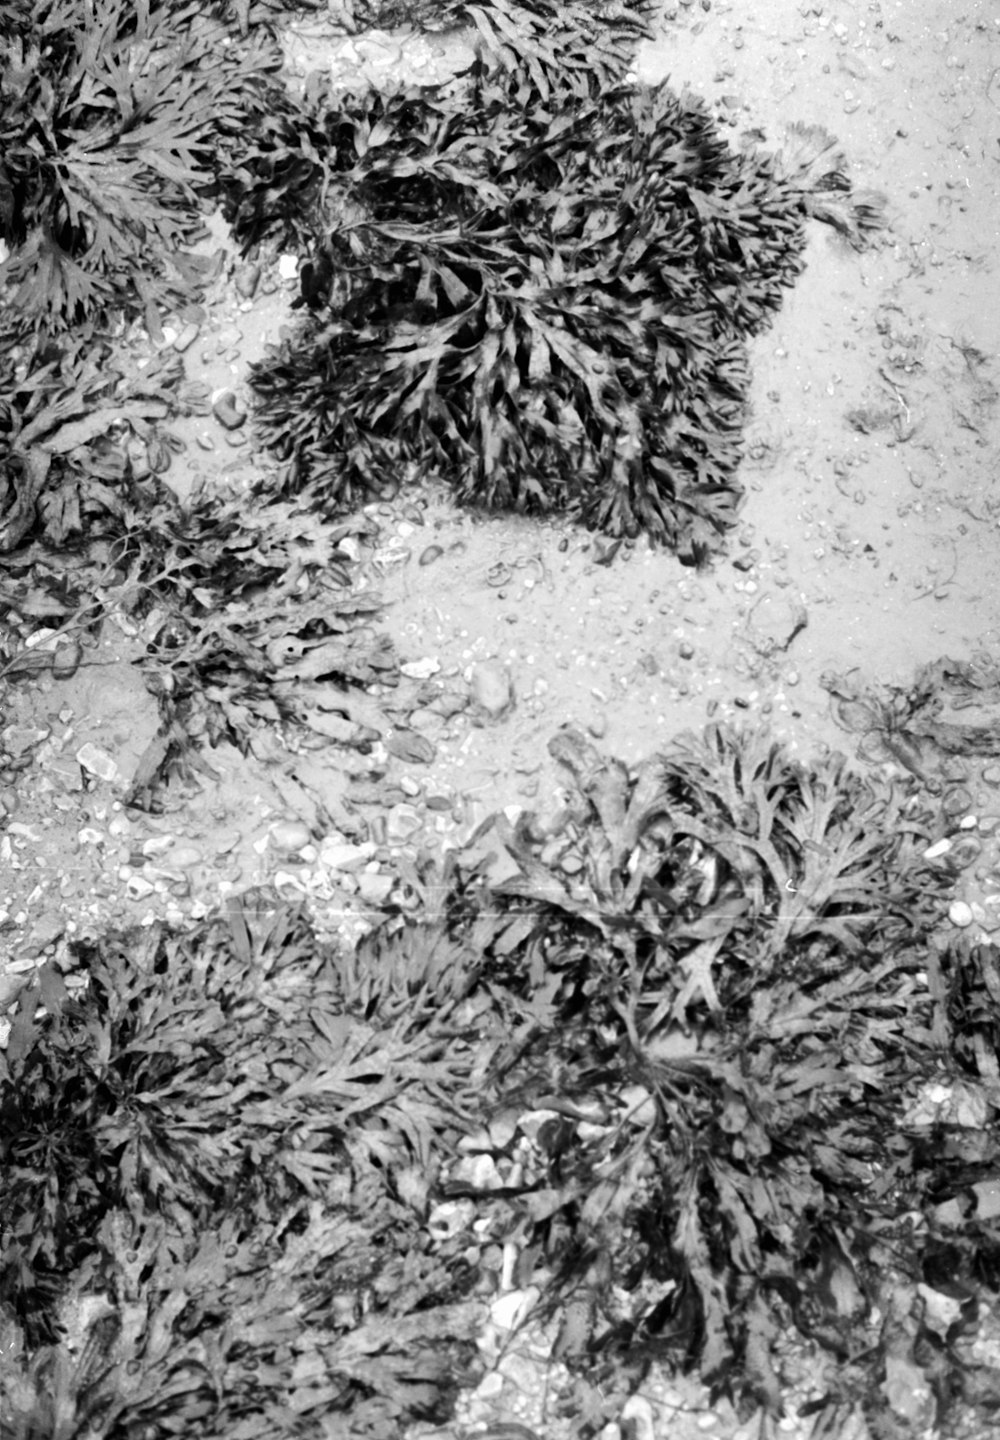 a black and white photo of seaweed on the beach